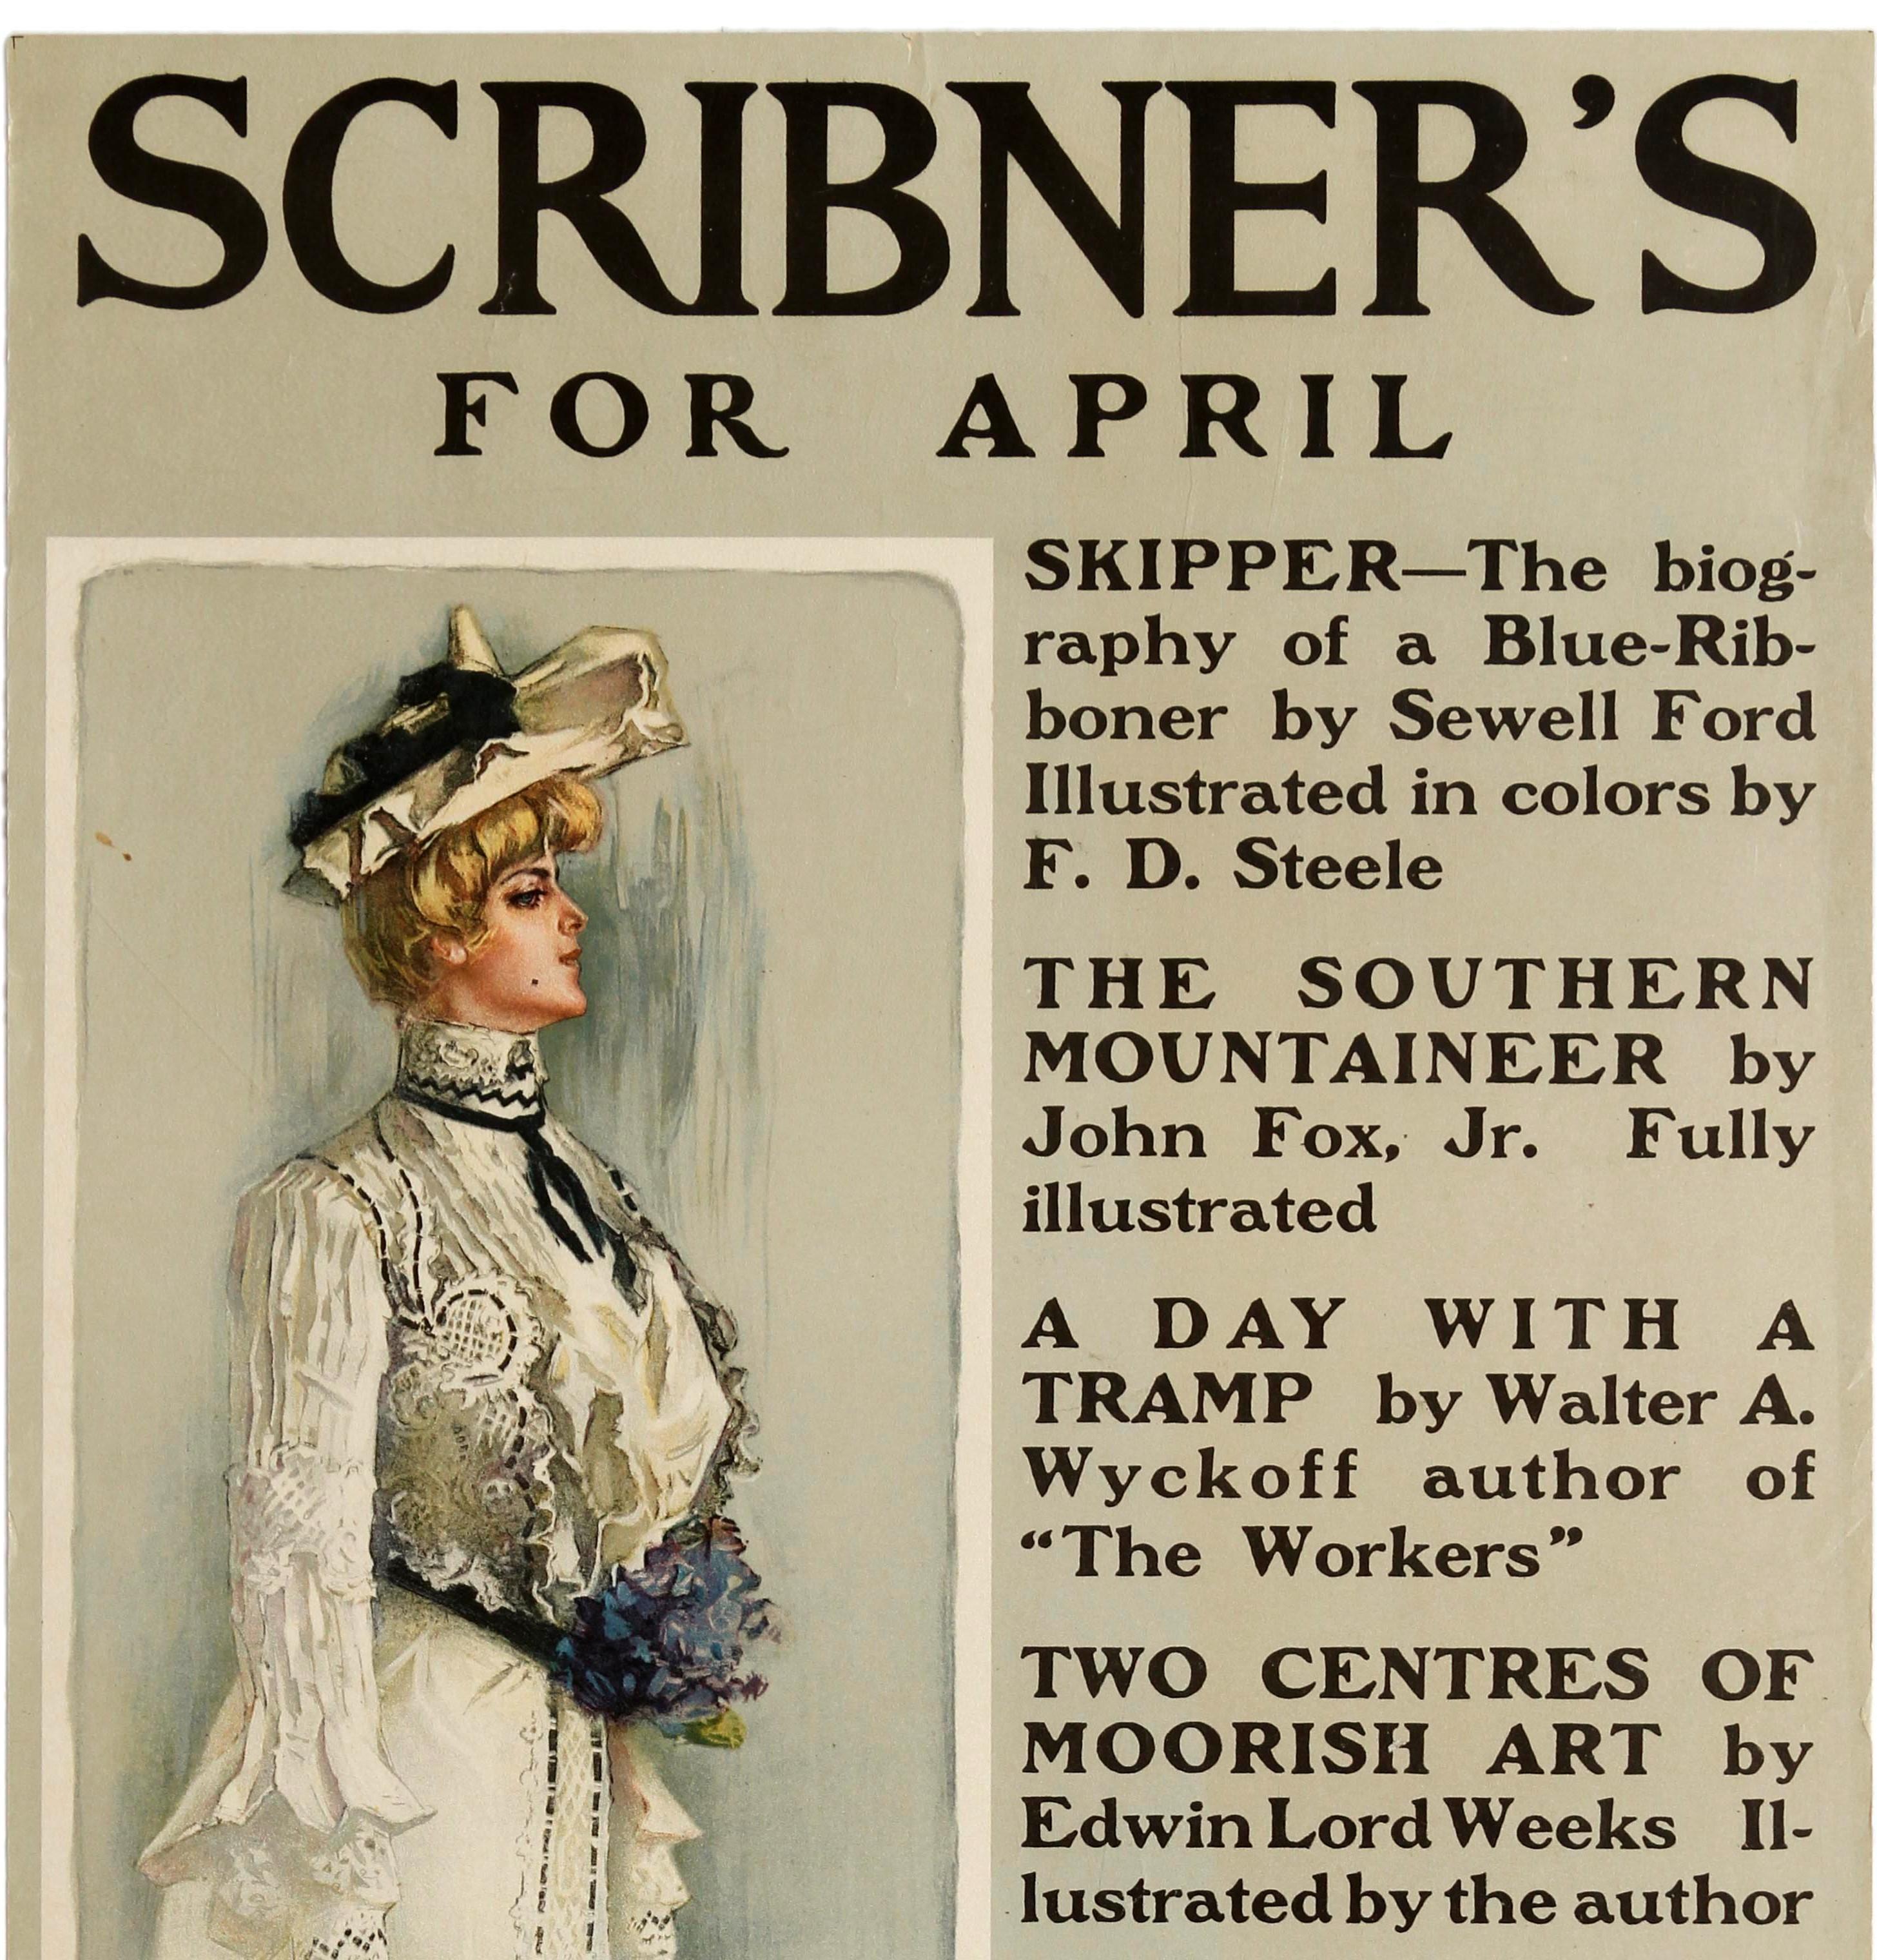 Original antique magazine advertising poster for the American periodical Scribner's (1887-1939) featuring a colorful illustration by Will Grefe (1875-1957) of a fashionably lady in an Edwardian style dress with the stylized title text above and